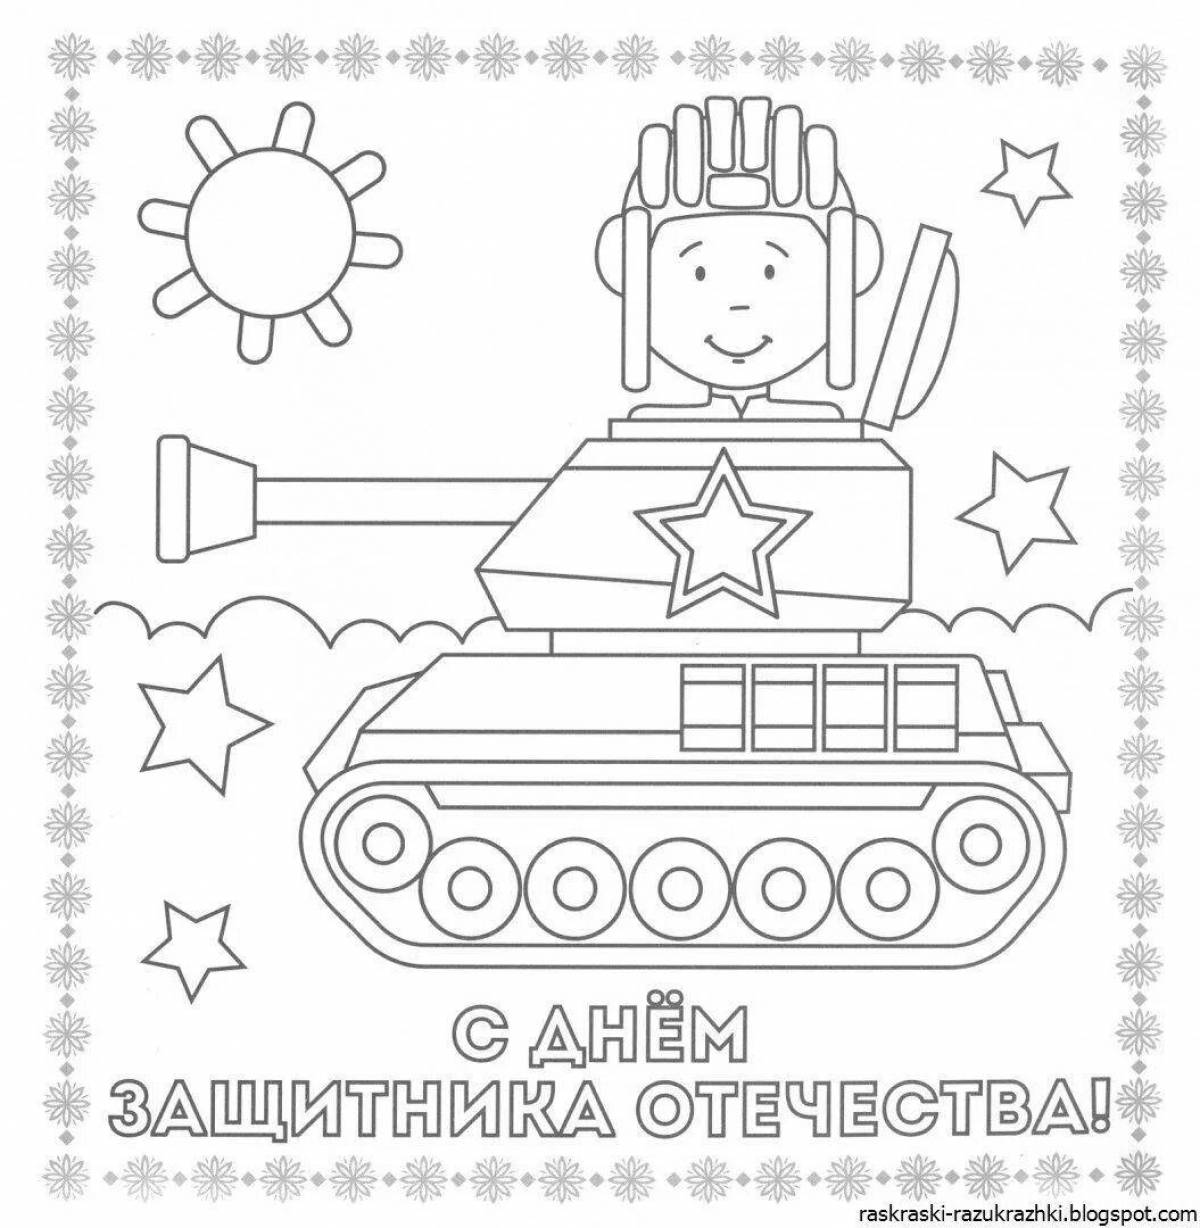 Delightful defenders of the fatherland for children